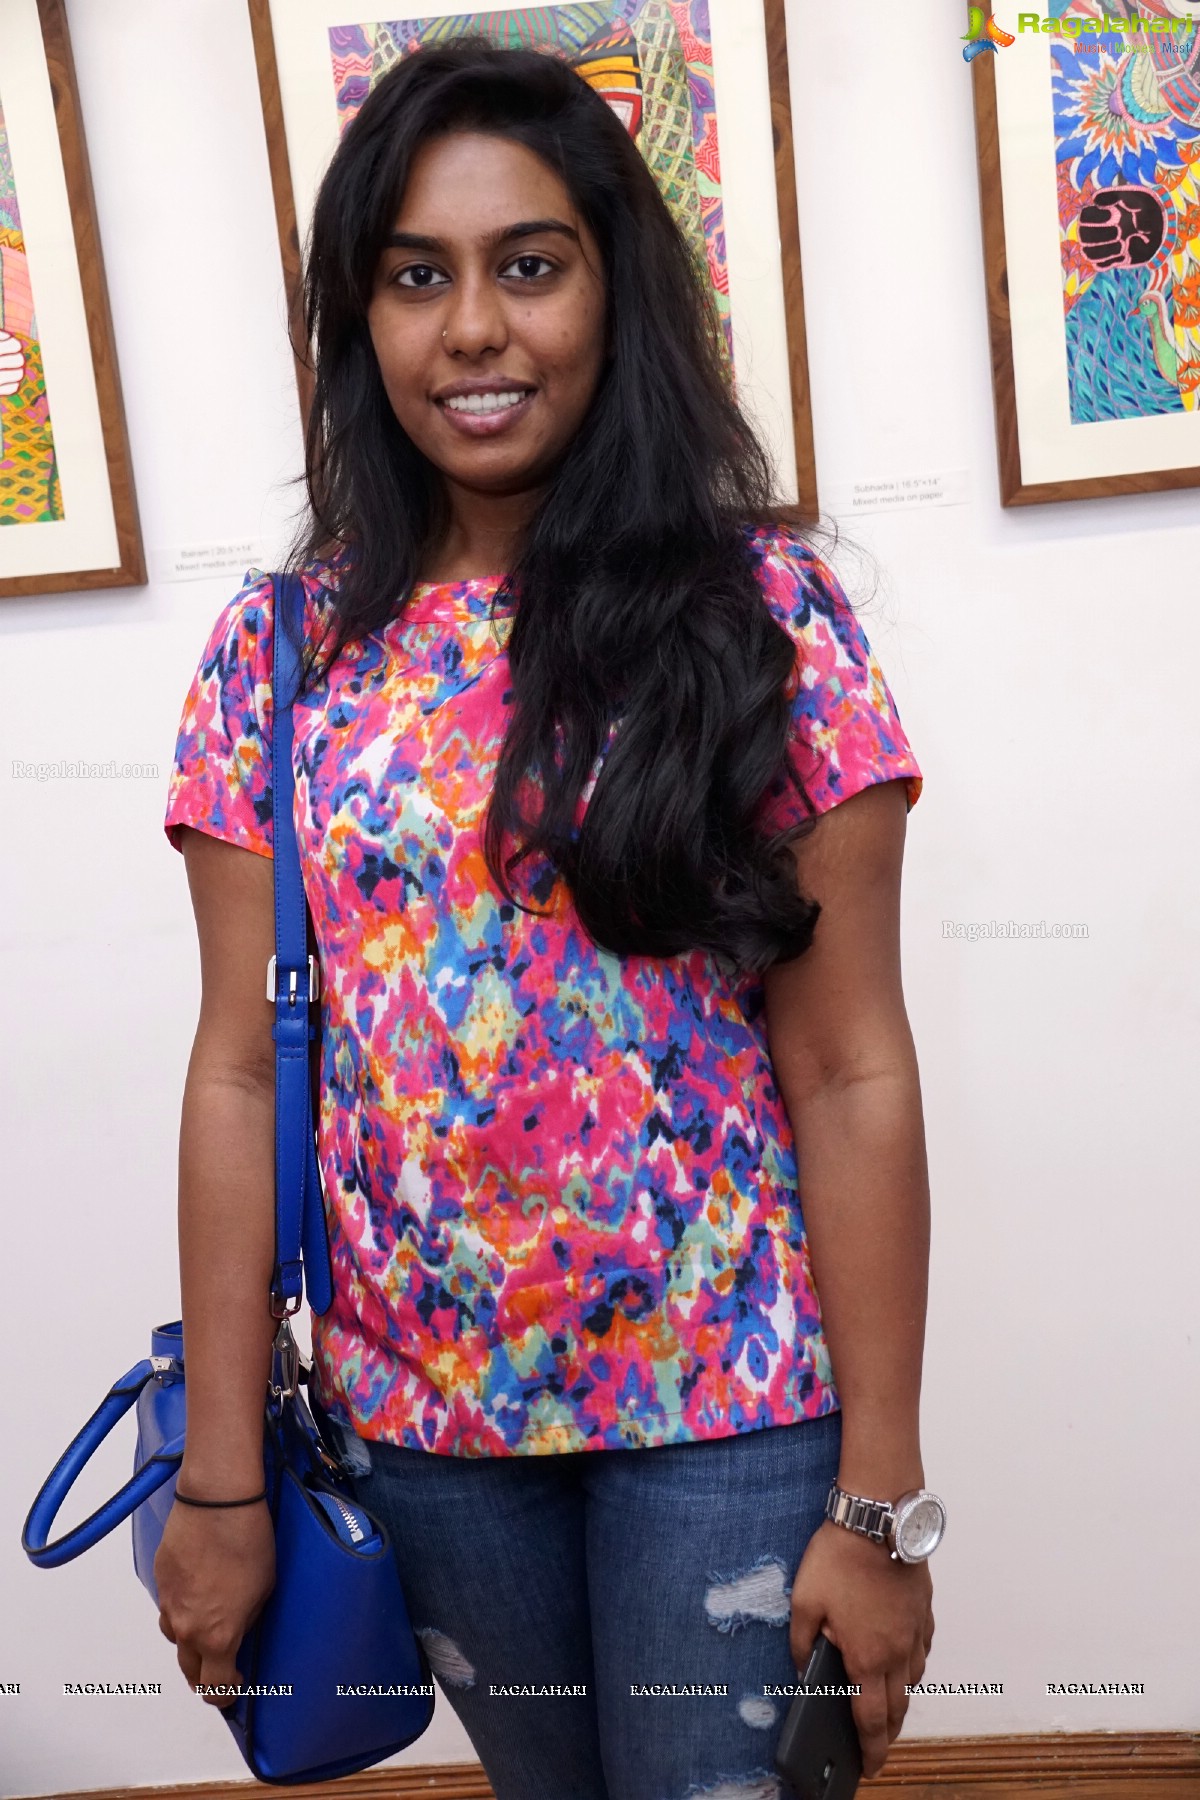 Without Acid - A Solo Exhibition by Malavika Reddy at The Gallery Cafe